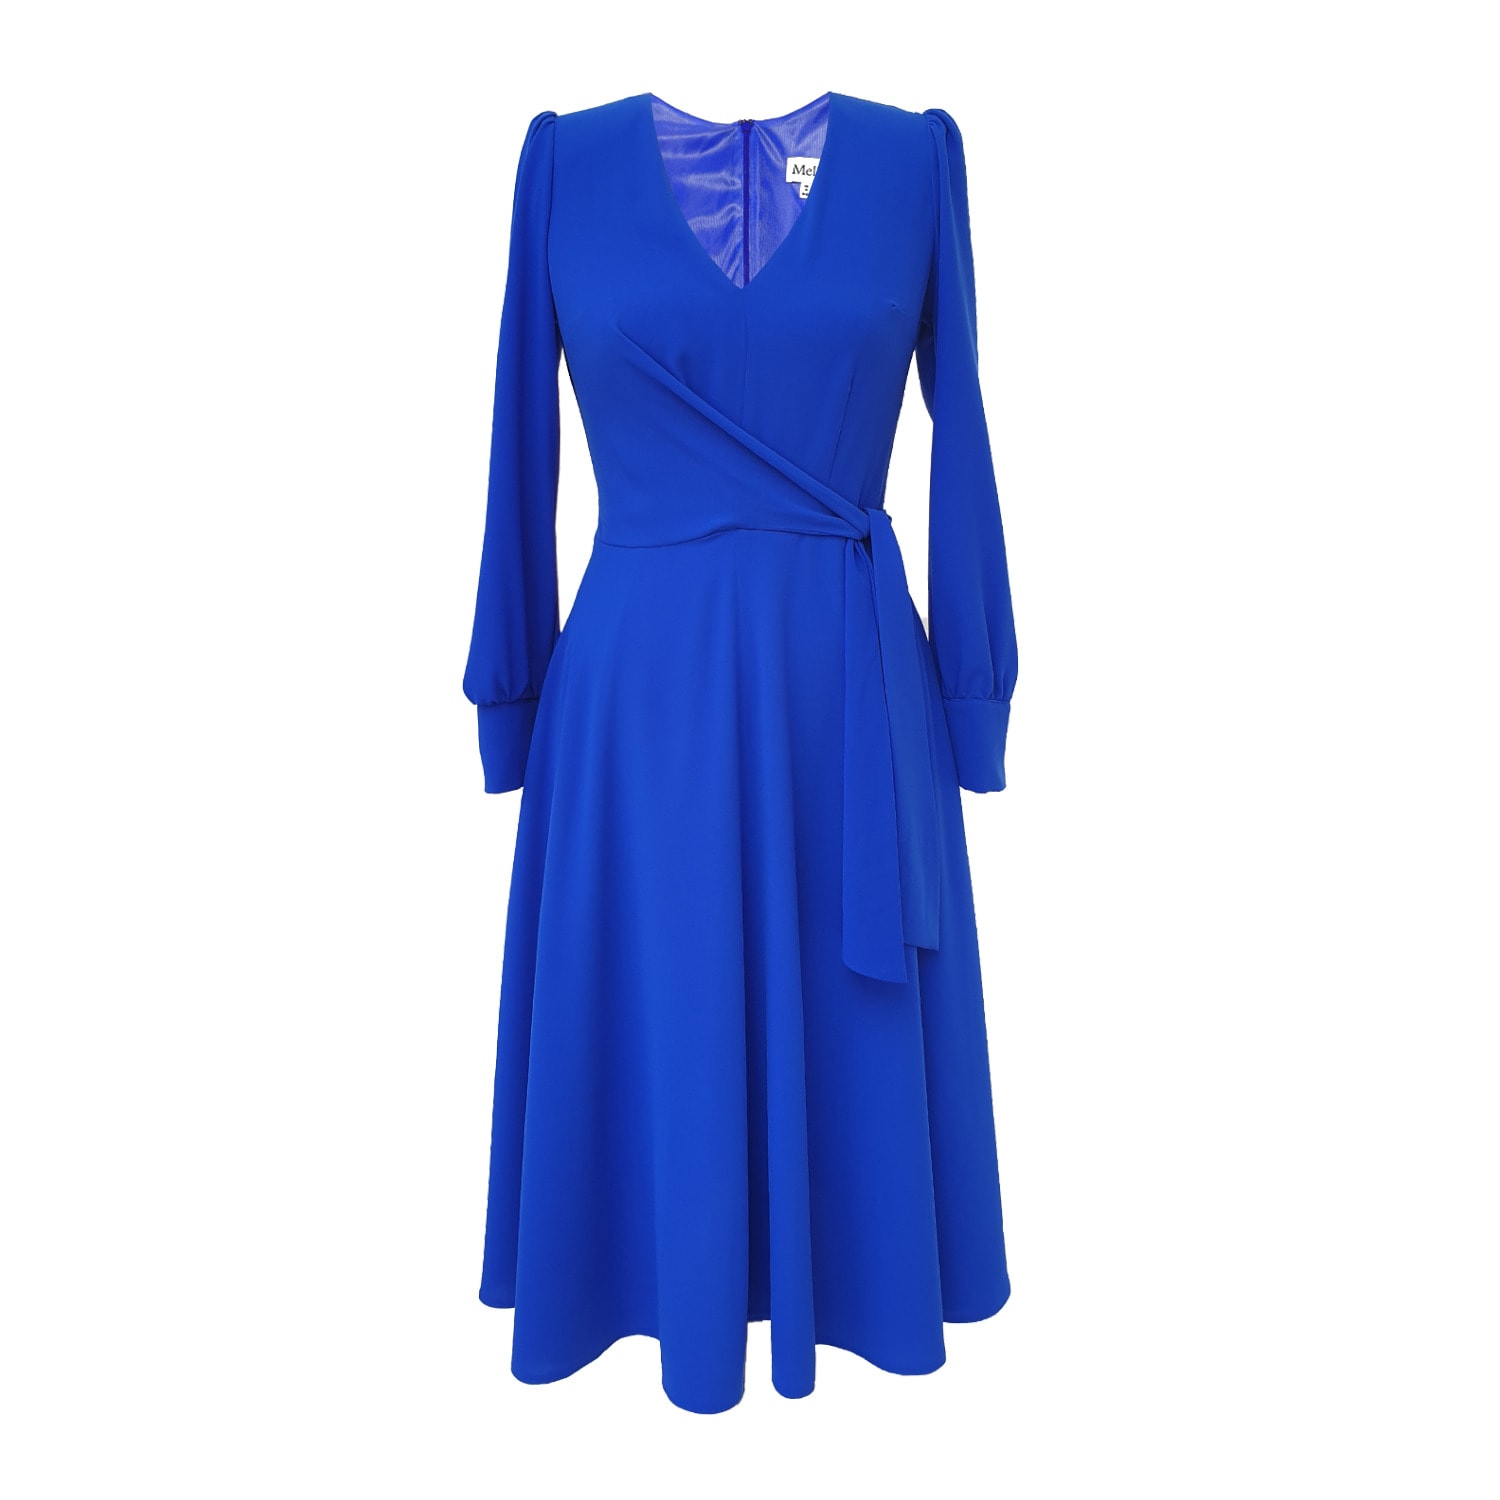 Mellaris Women's Brittany Blue Dress In French Crepe